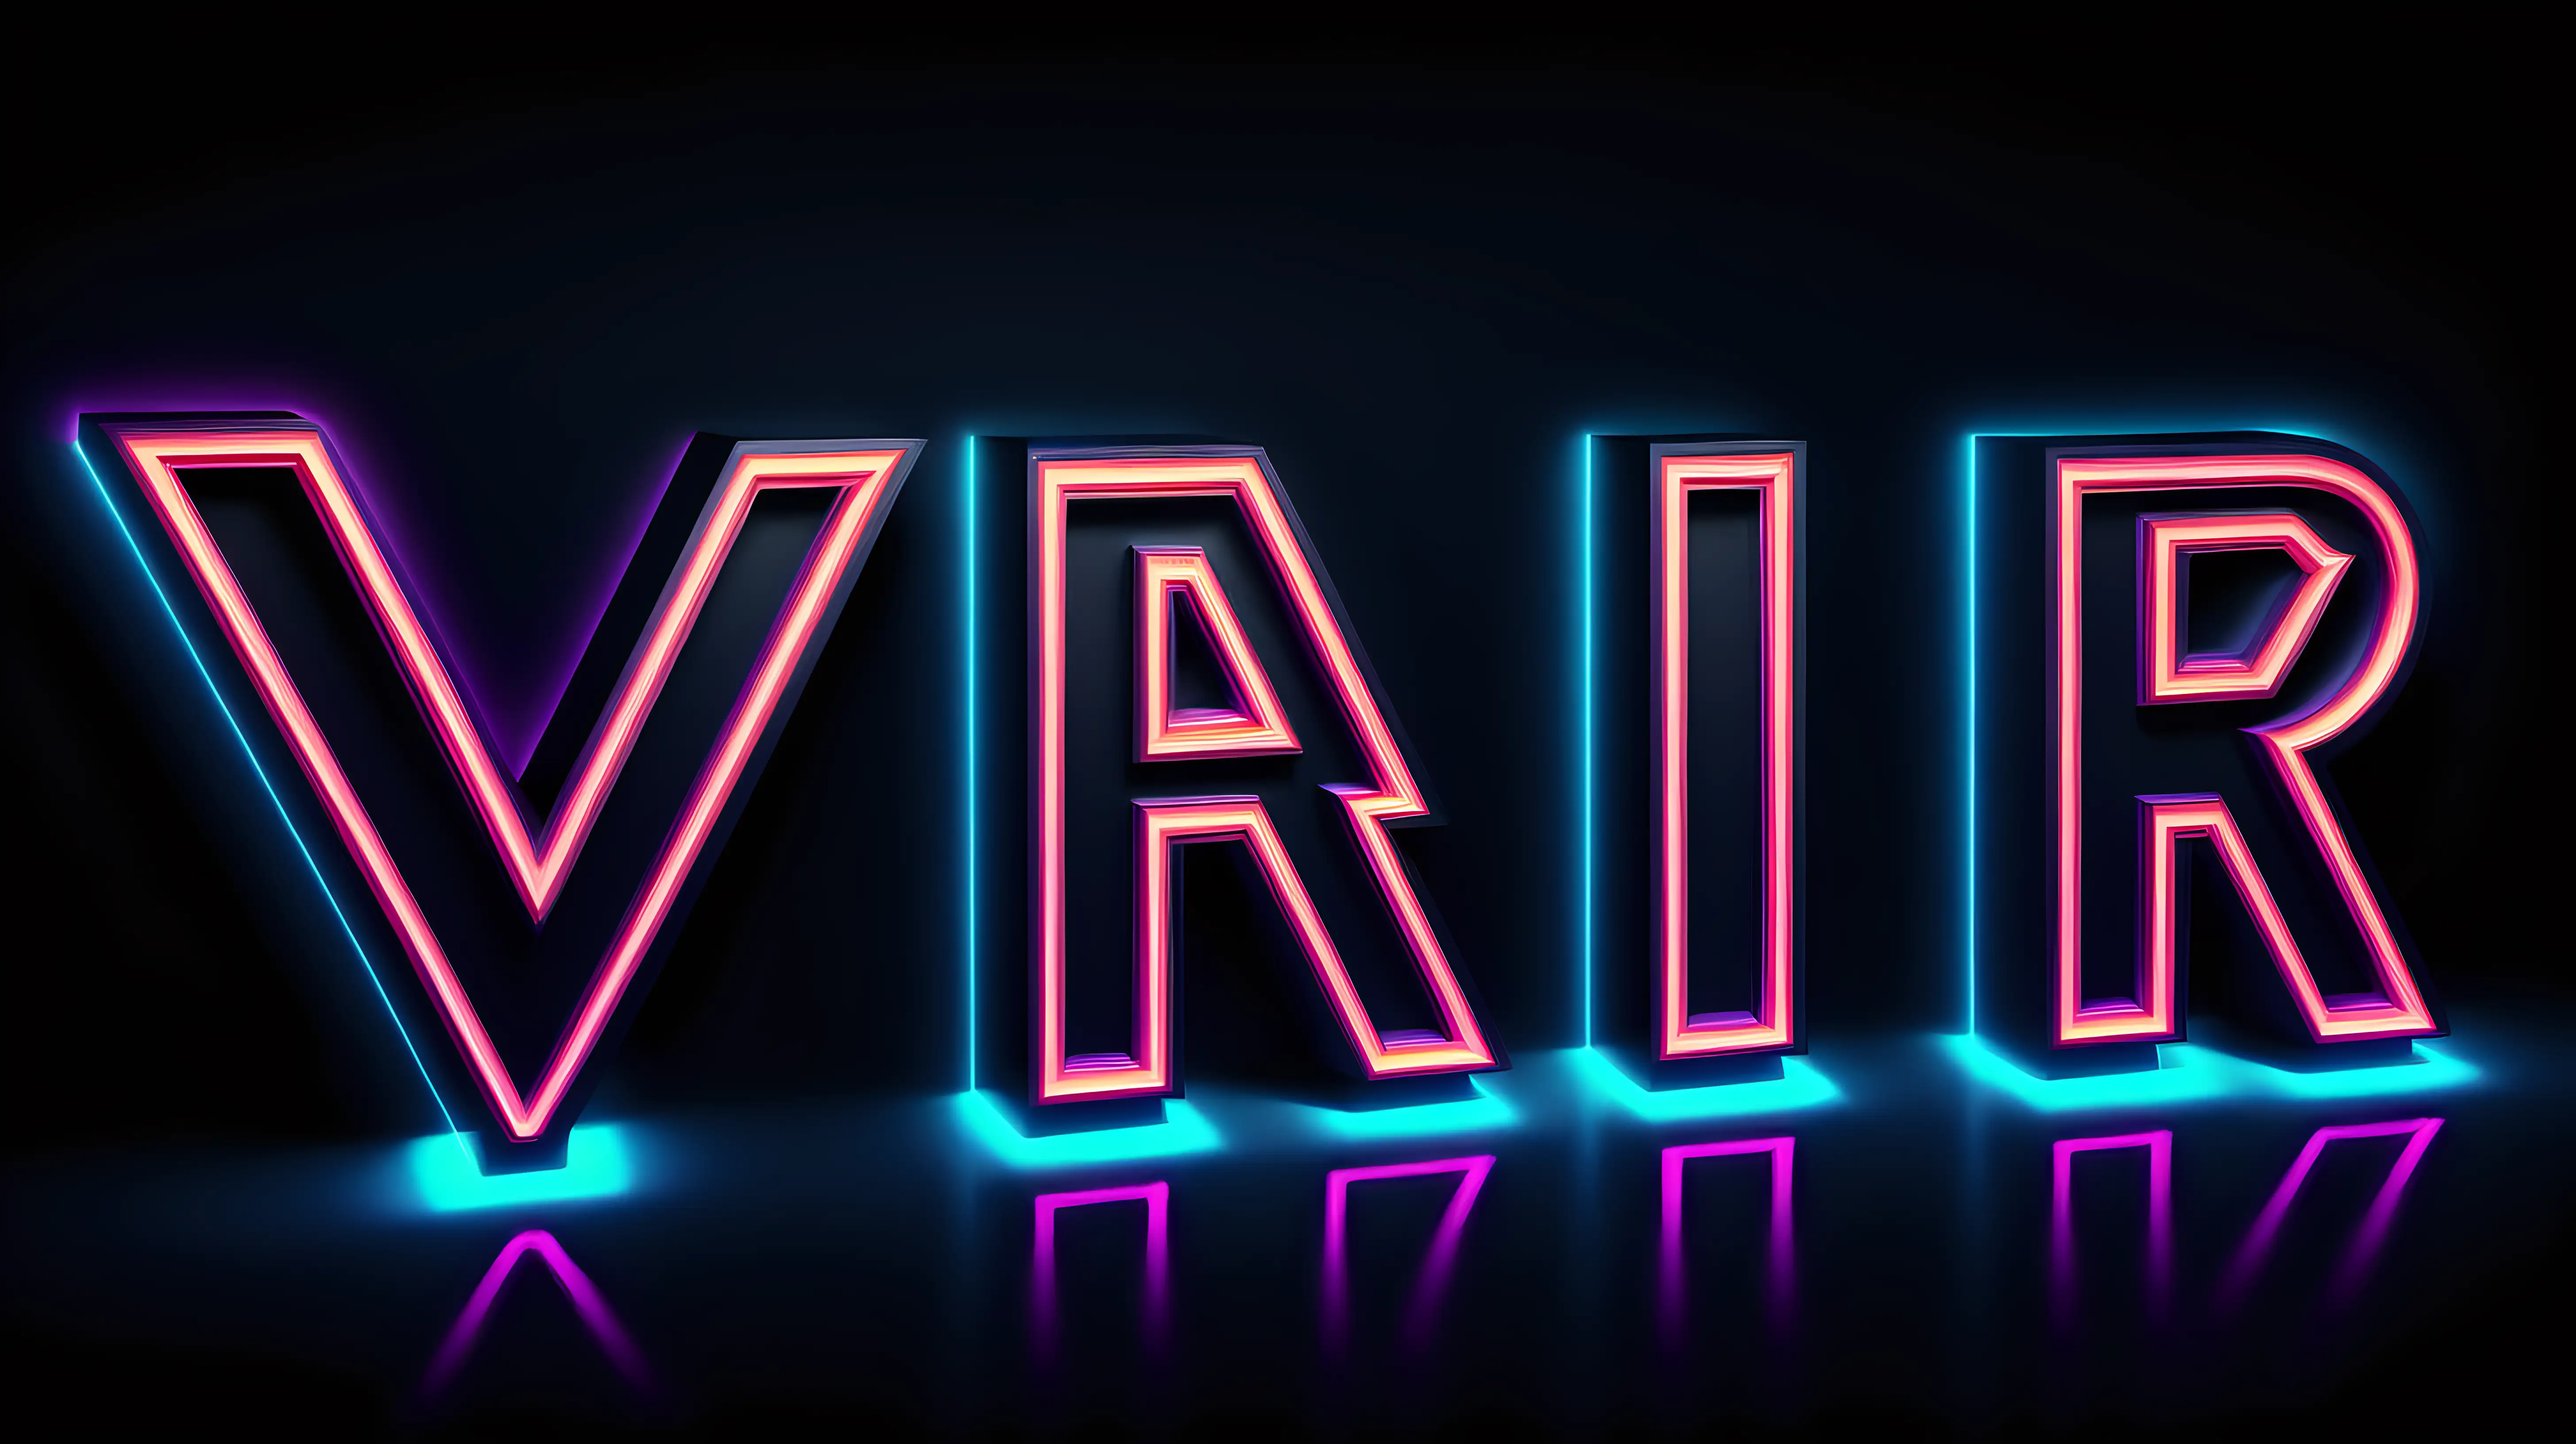 "V.R" emblazoned in glowing, neon letters, casting a futuristic glow against a dark digital background.